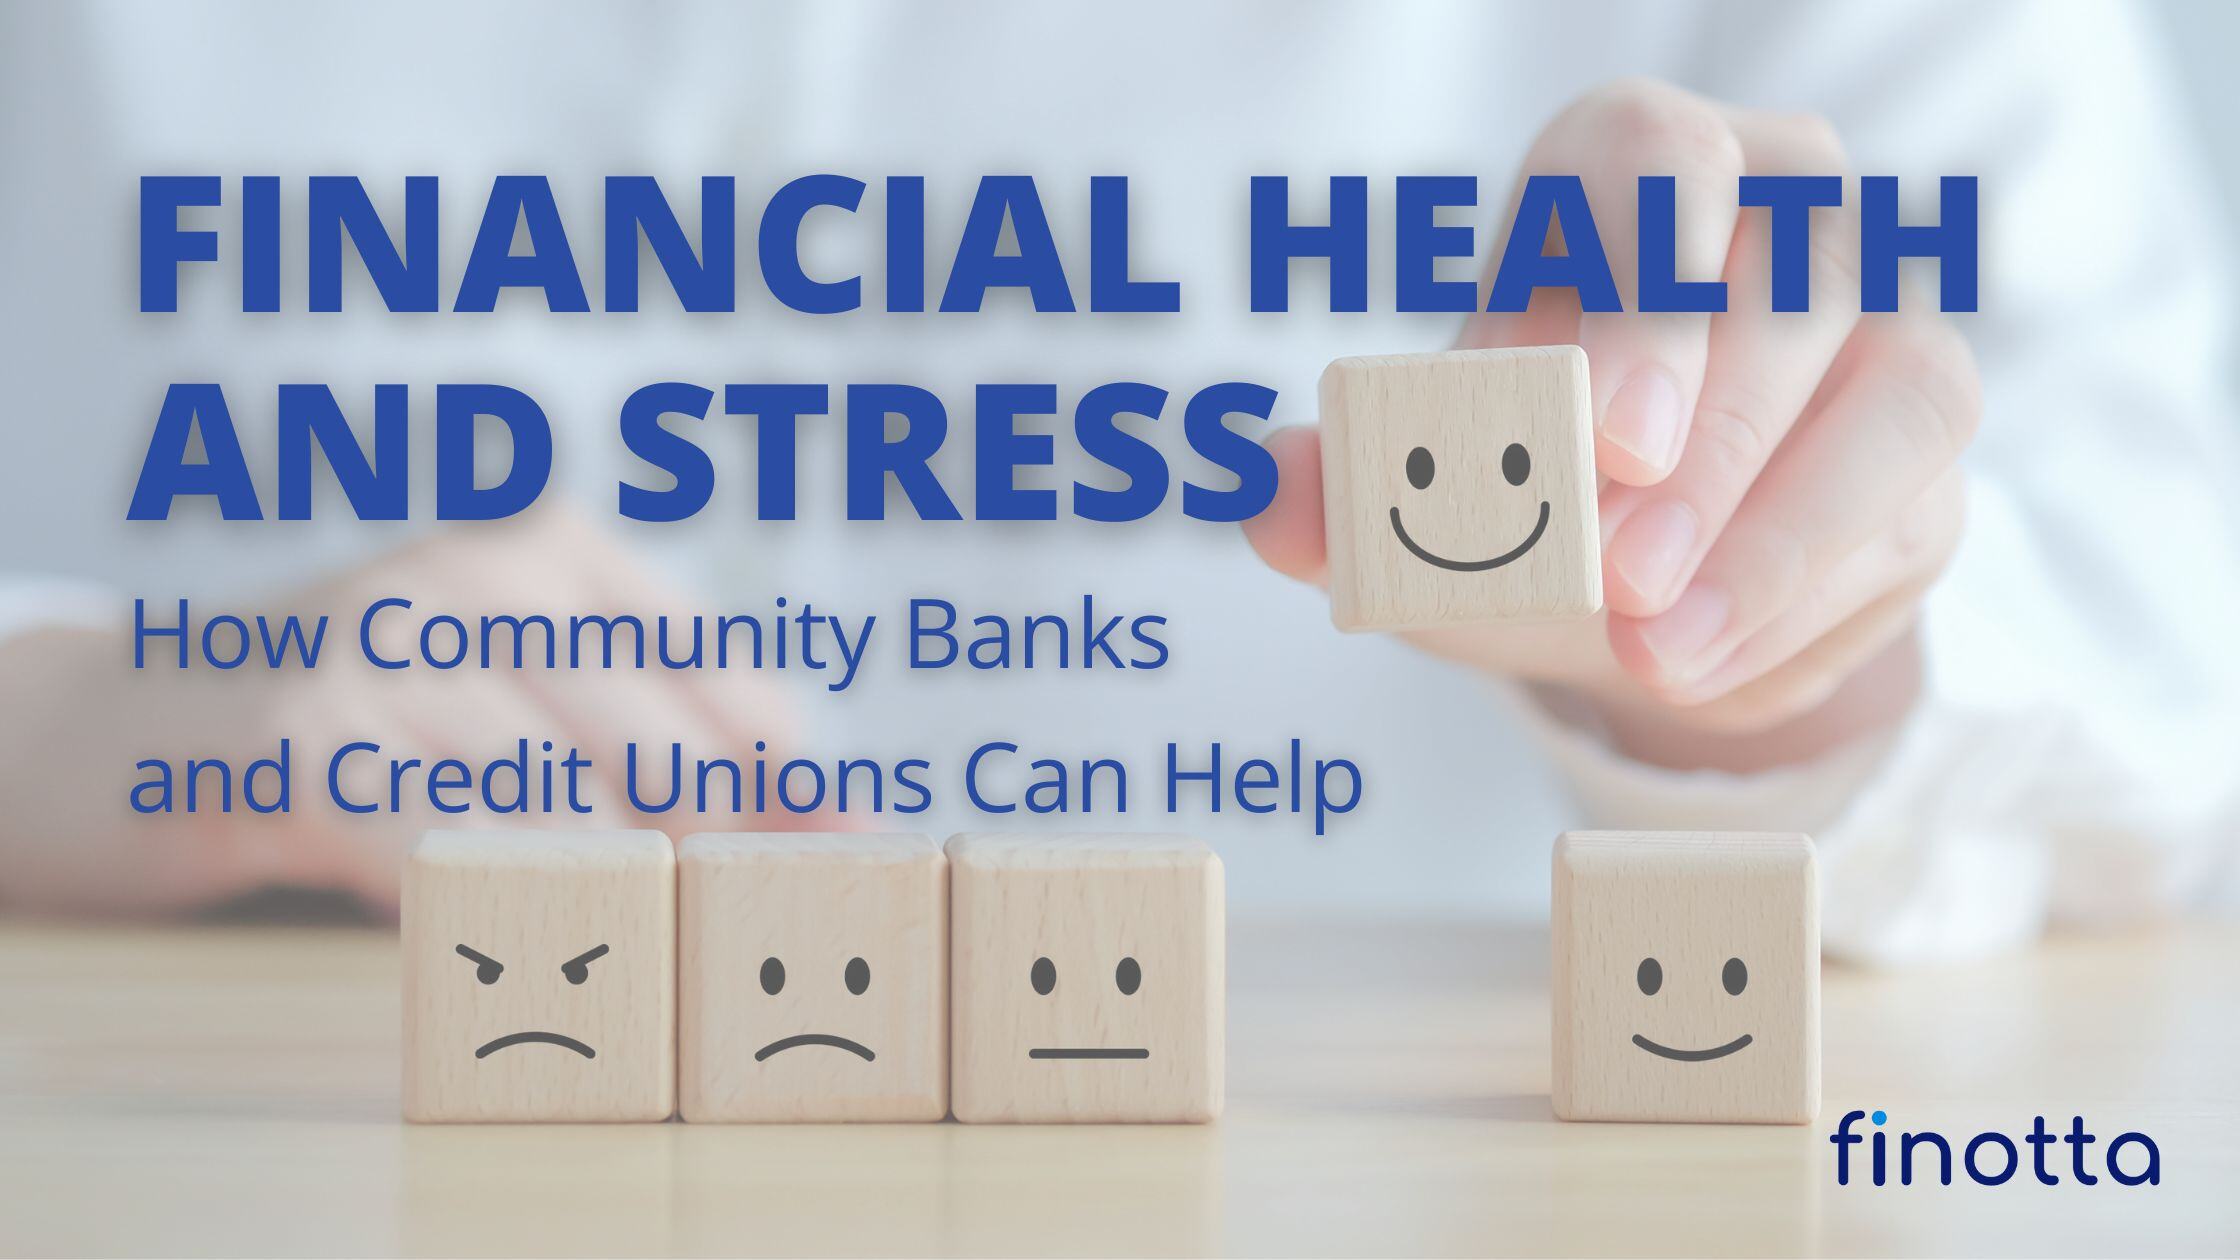 Financial Health and Stress: How Community Banks and Credit Unions Can Help